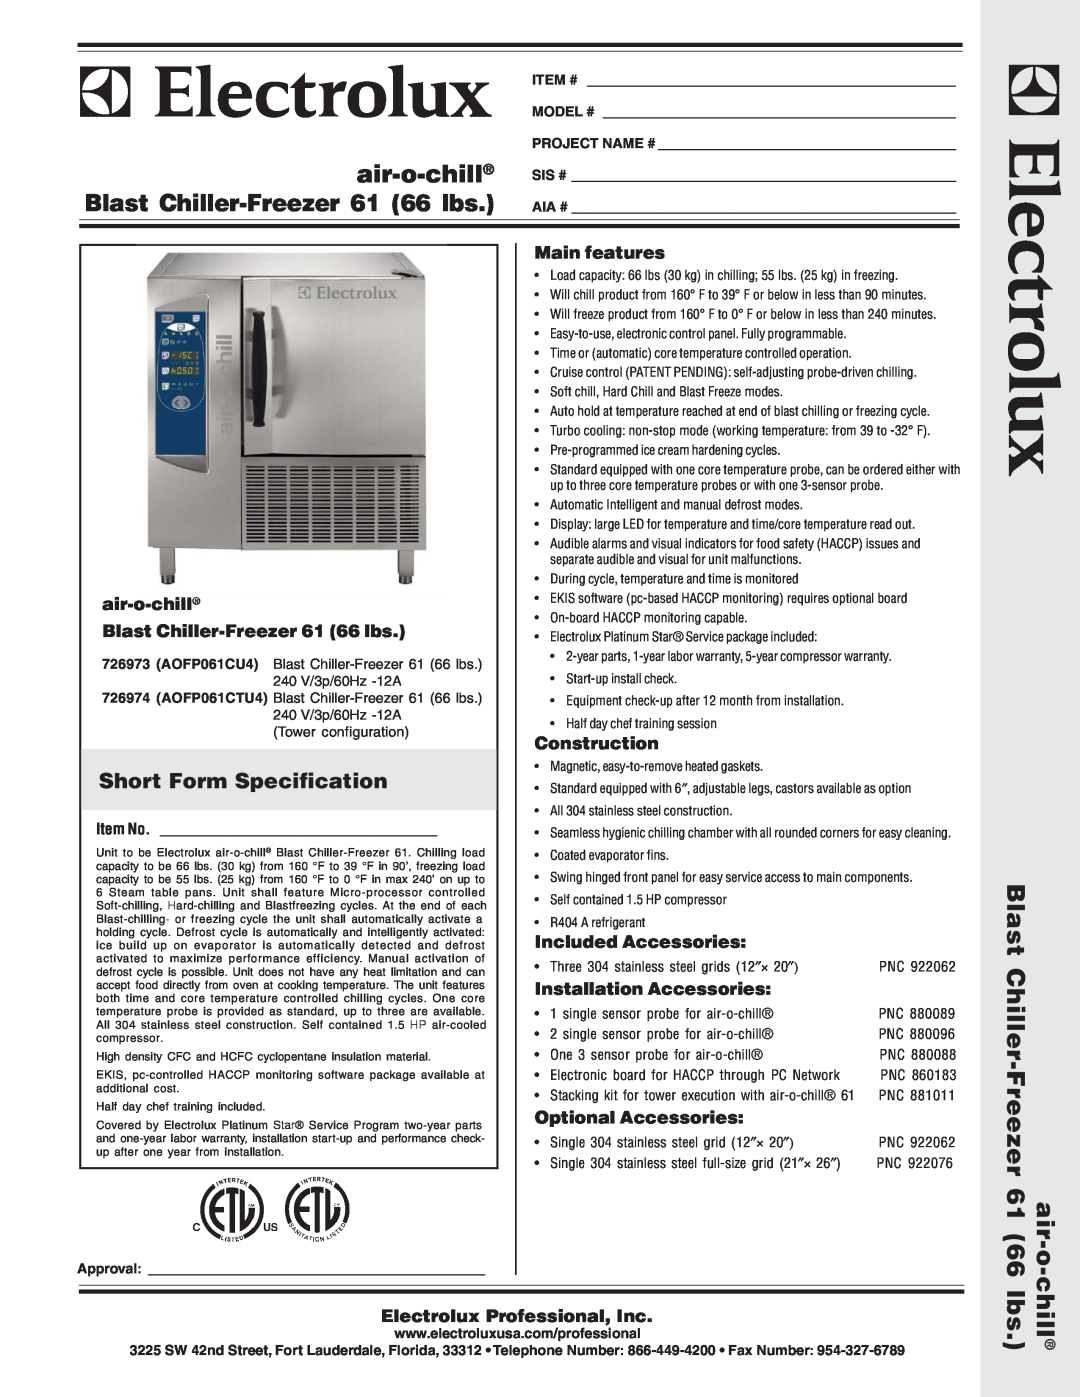 Electrolux 726973 warranty Short Form Specification, air-o-chill Blast Chiller-Freezer 61 66 lbs, Main features, chill lbs 